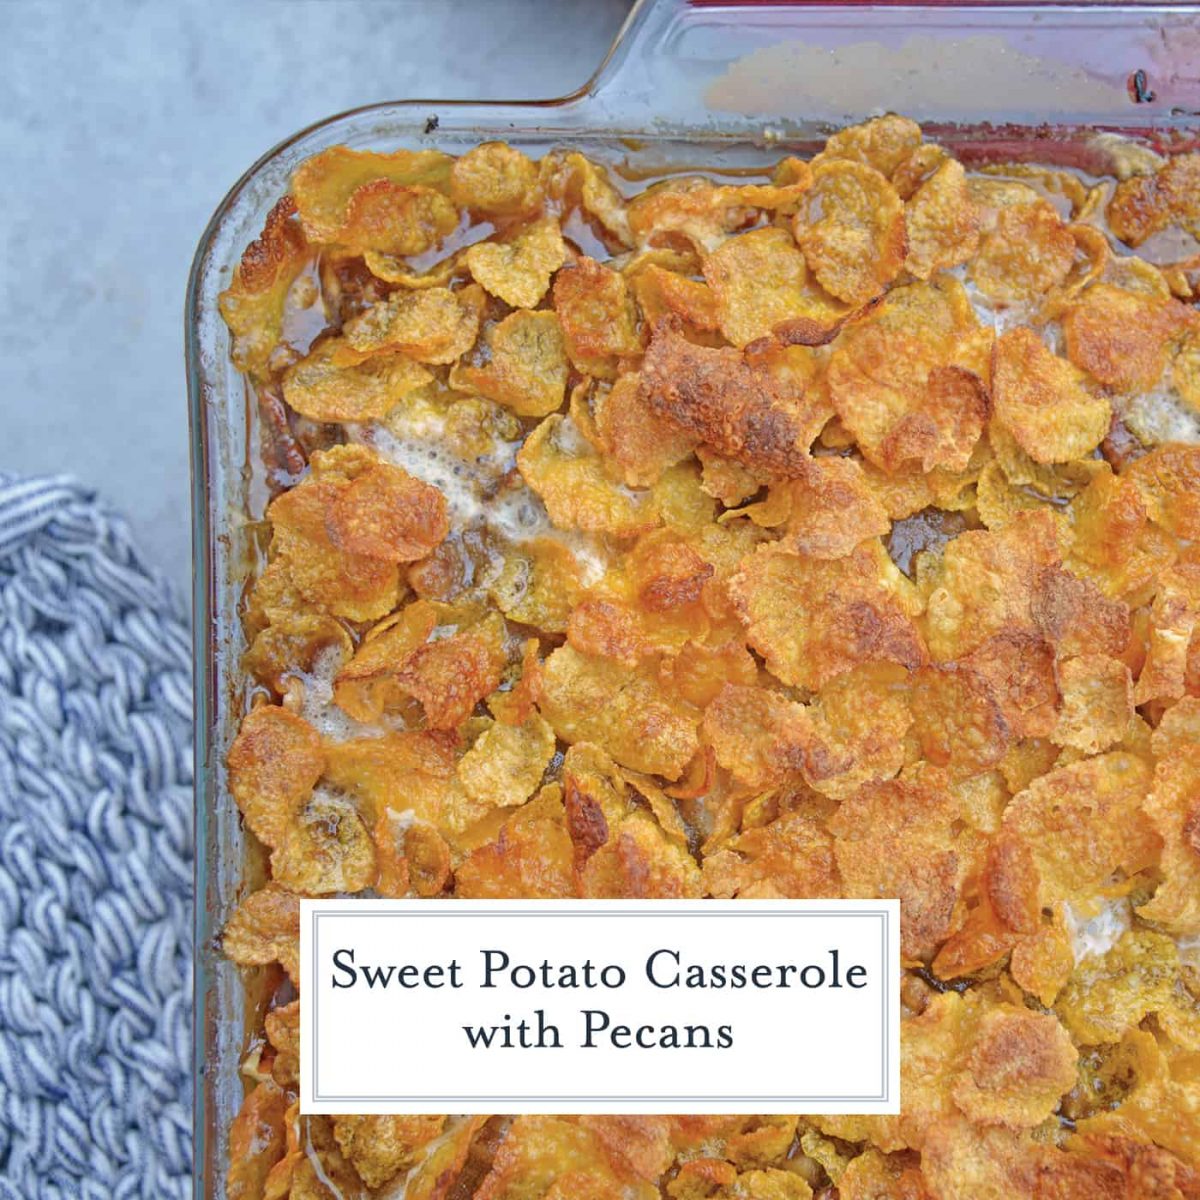 Sweet Potato Casserole with Pecans is the ultimate sweet potato souffle recipe using fresh sweet potatoes, pecan topping and marshmallows. #sweetpotatocasserole #sweetpotatosouffle www.savoryexperiments.com